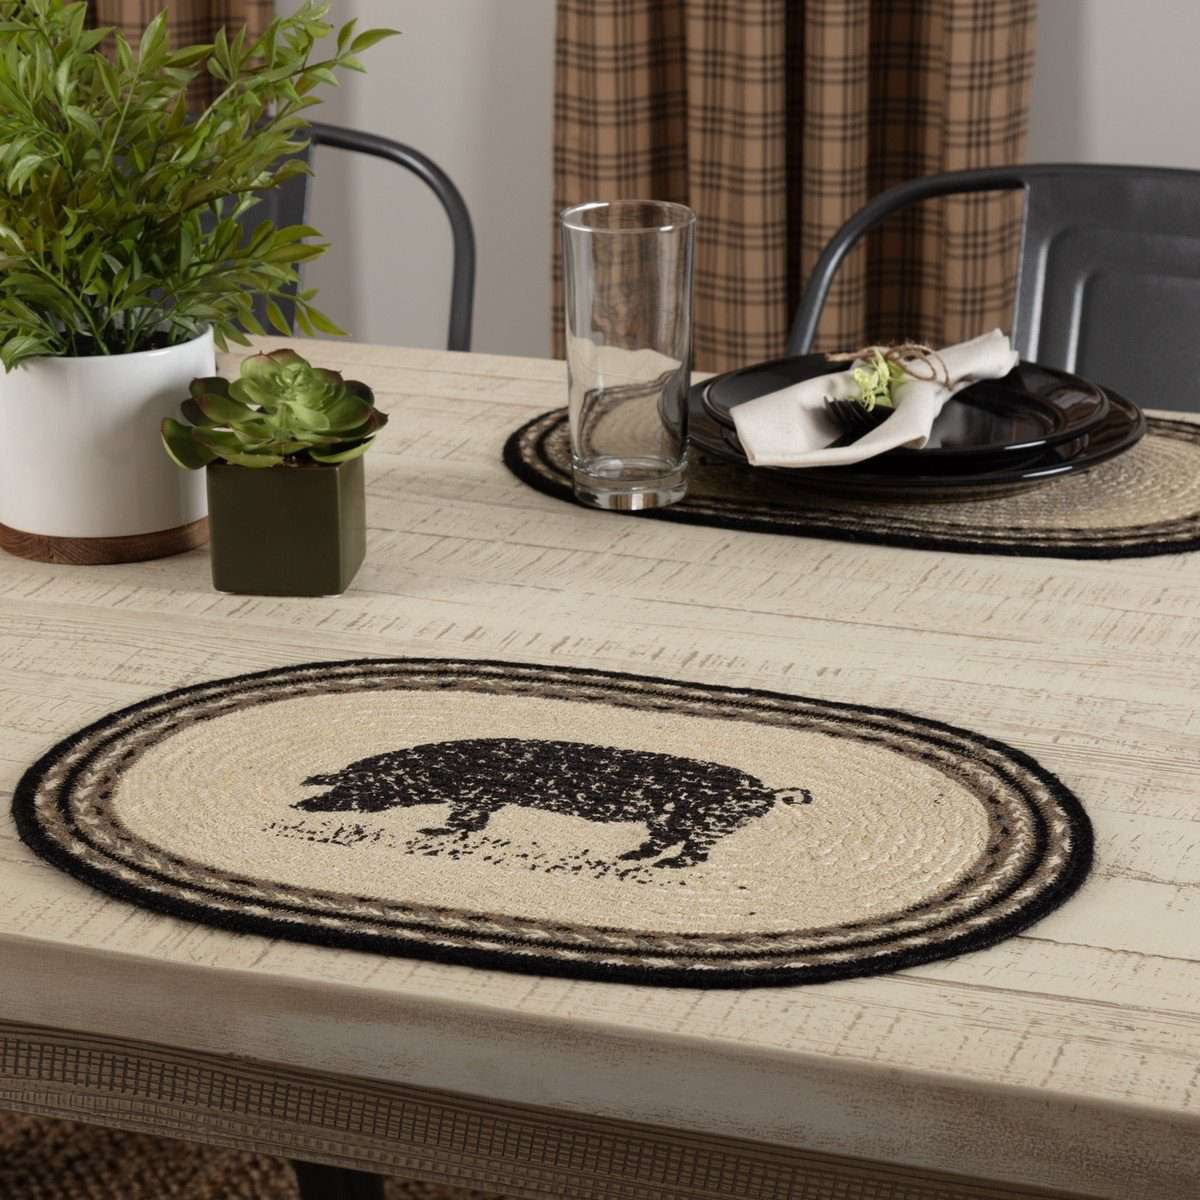 Sawyer Mill Charcoal Pig Jute Braided Placemat Set of 6 - The Fox Decor